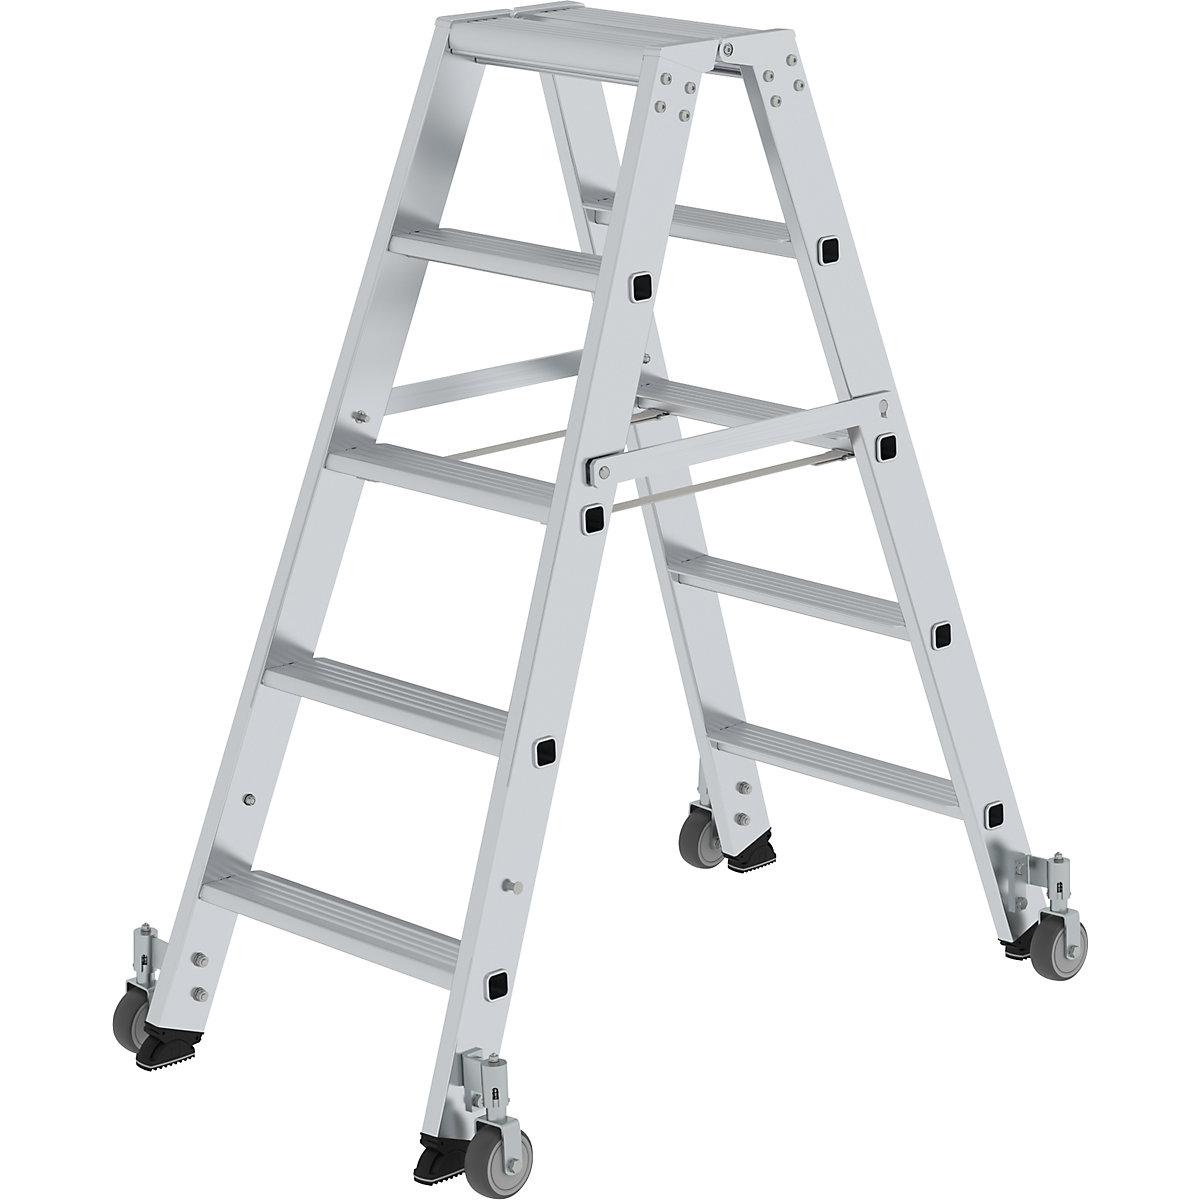 Step ladder, double sided – MUNK, mobile model, 2 x 5 steps-8